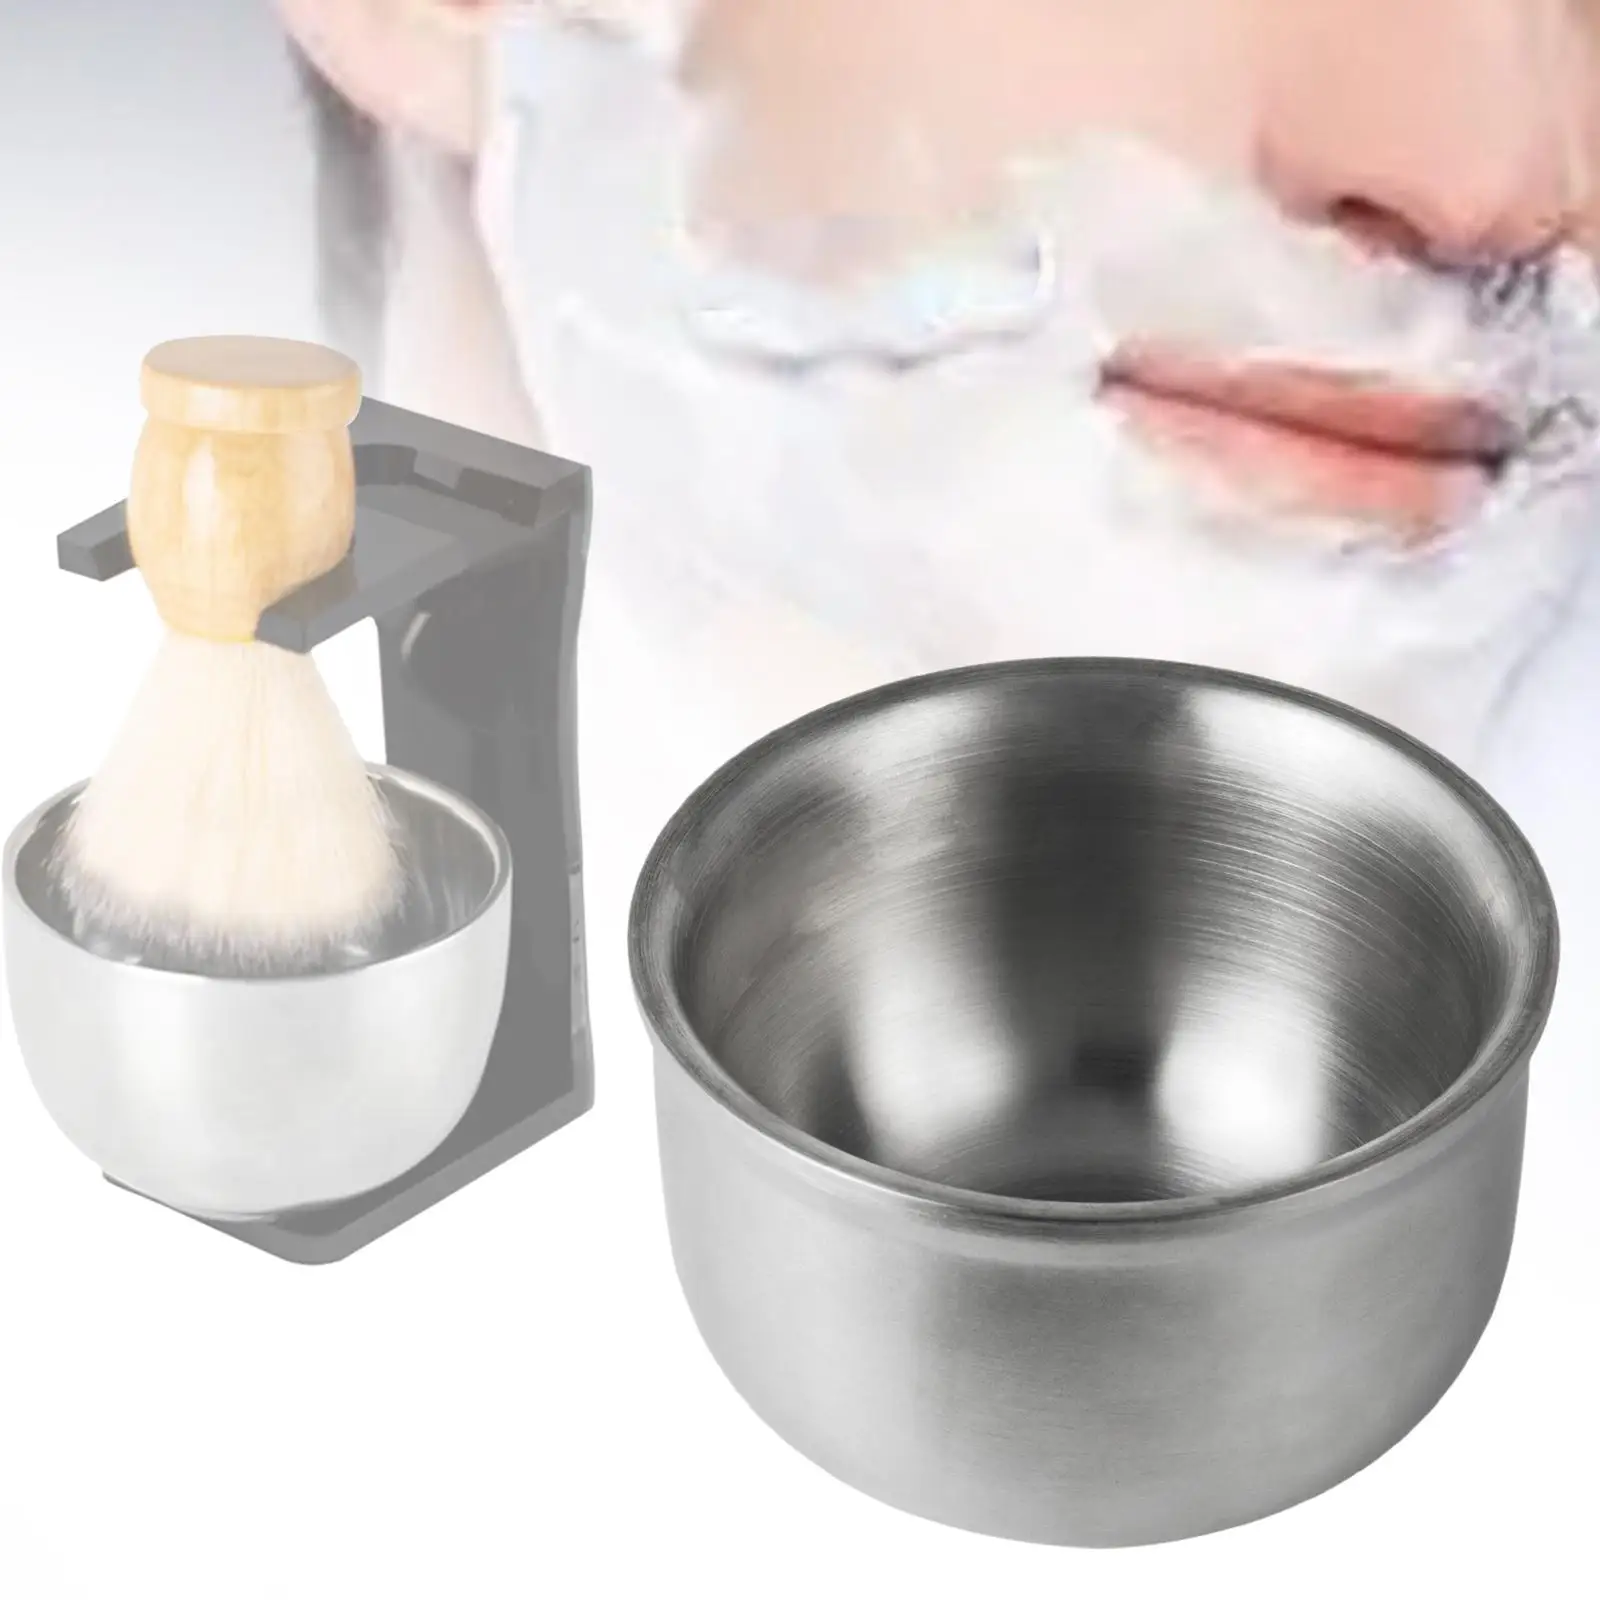 Shaving Bowl Shaving Mug Smooth Easy to Lather Small Heat Insulation Shave Soap Cup Shaving Cup for Gift Men